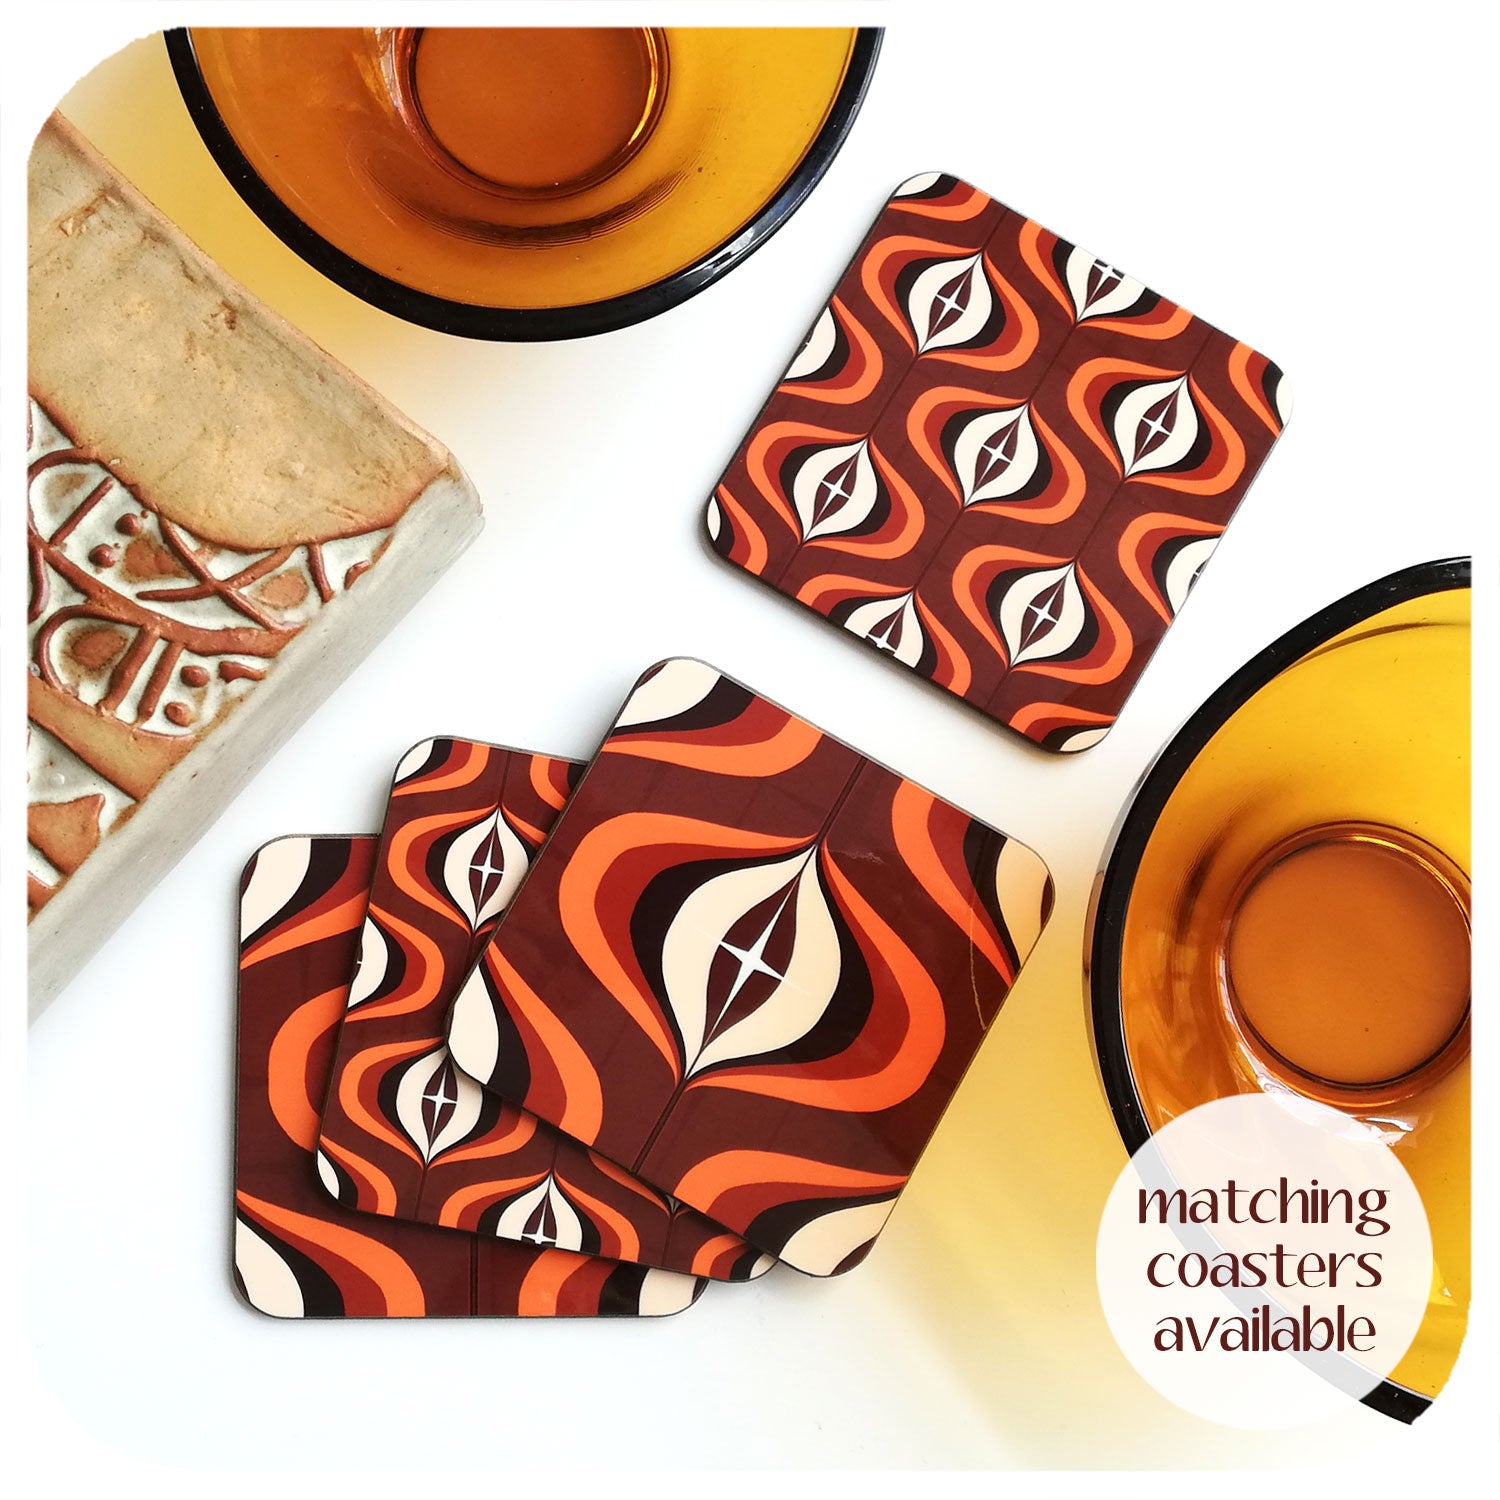 70s Style Op Art Coasters in Orange and Brown, set with vintage tableware | The Inkabilly Emporium